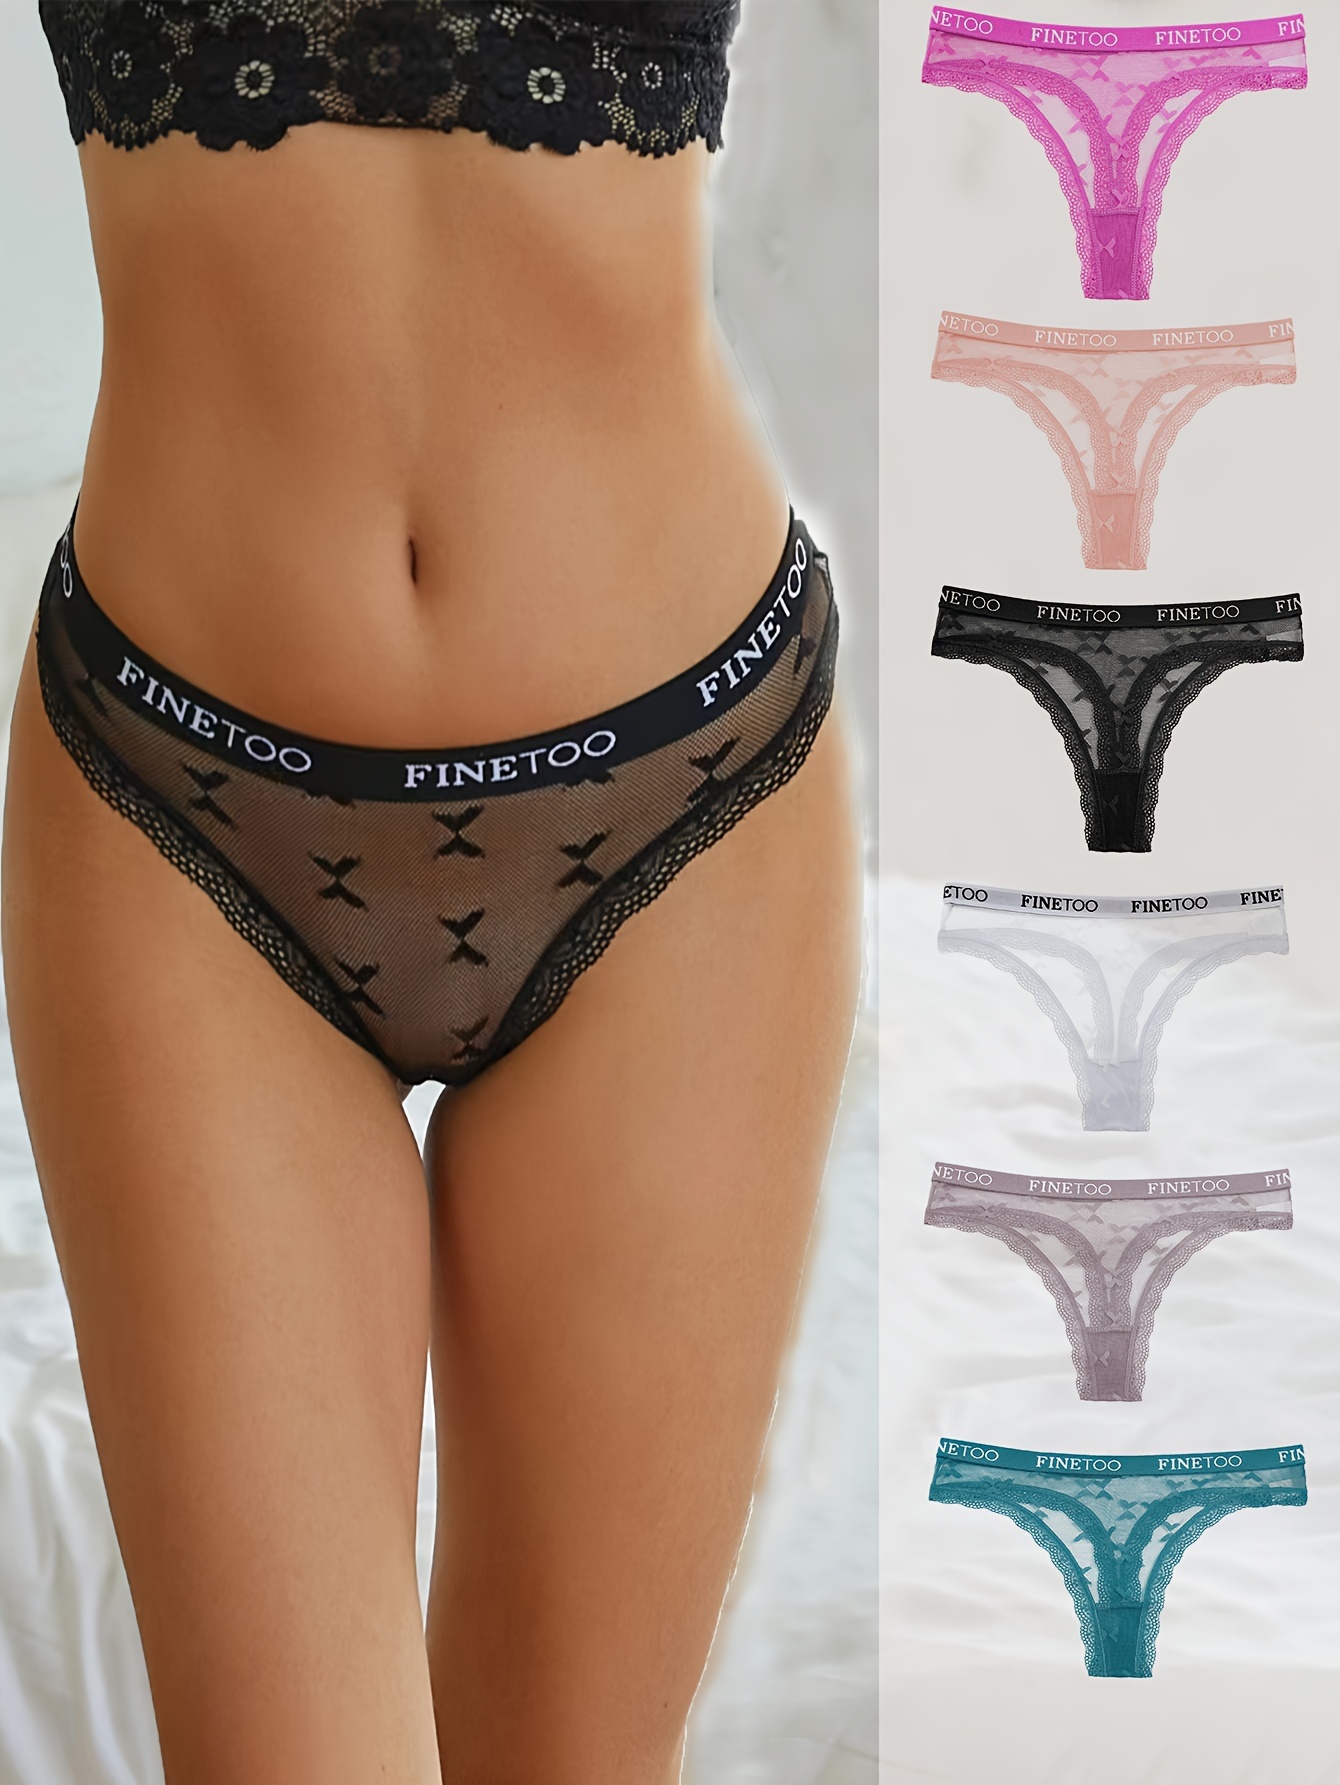 Letter Print Mesh Thongs, Breathable & Comfy Stretchy Intimates Panties,  Women's Lingerie & Underwear